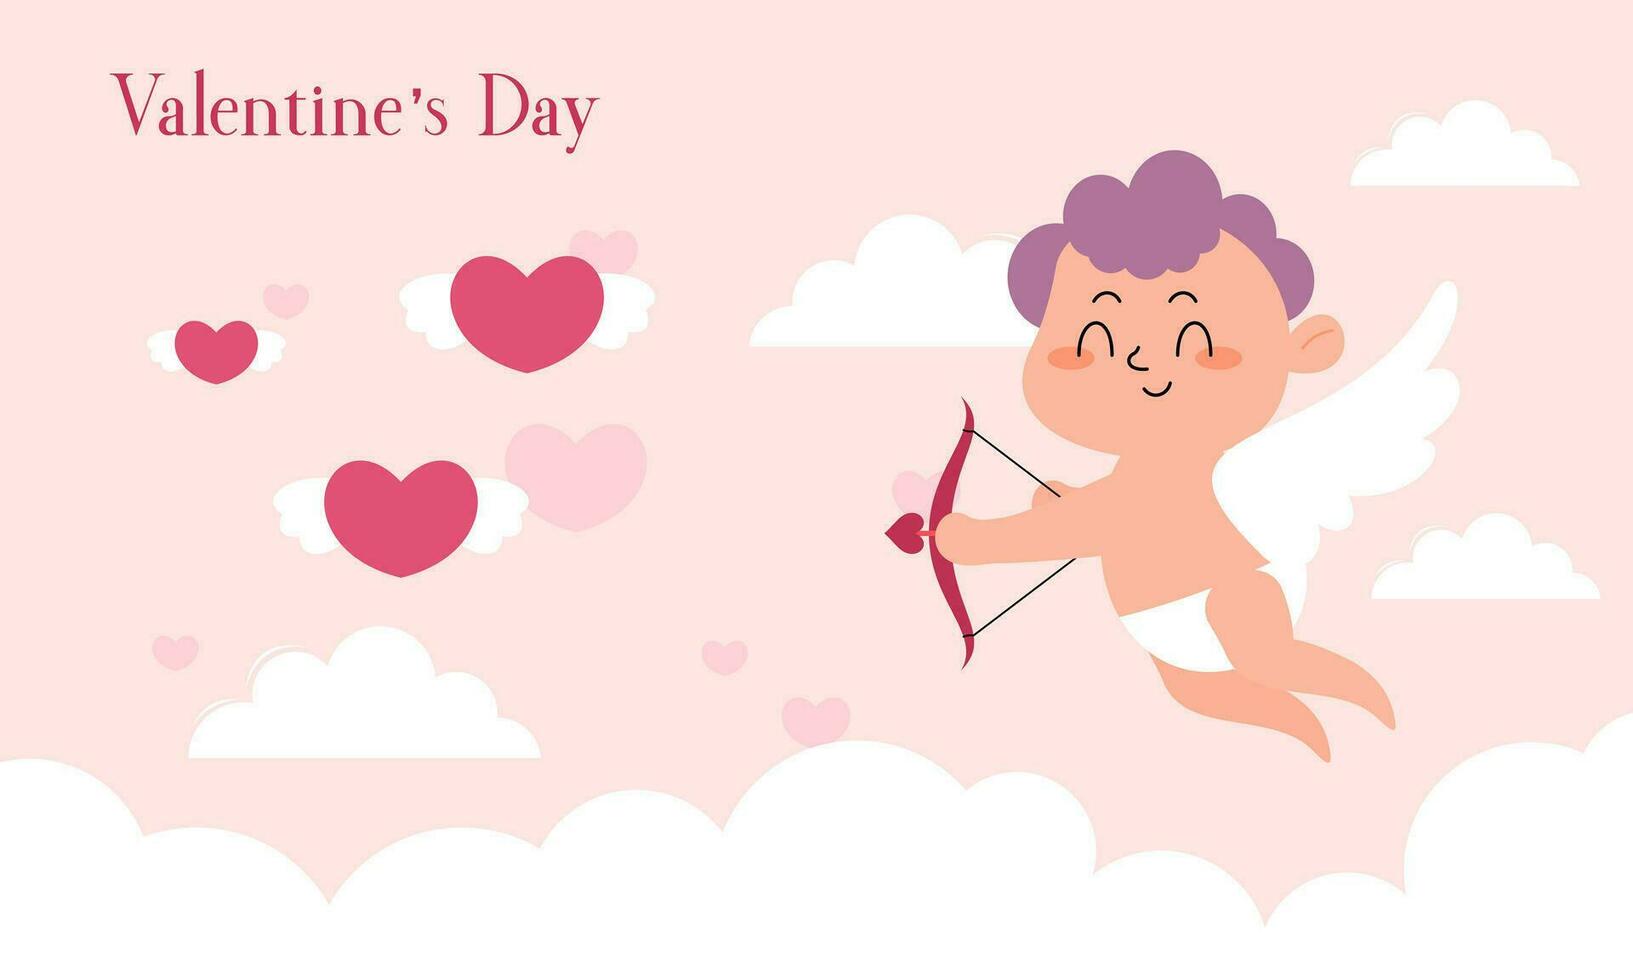 Valentine's Day Illustration with Cute Cupid Isolated on the Sky Clouds Background vector